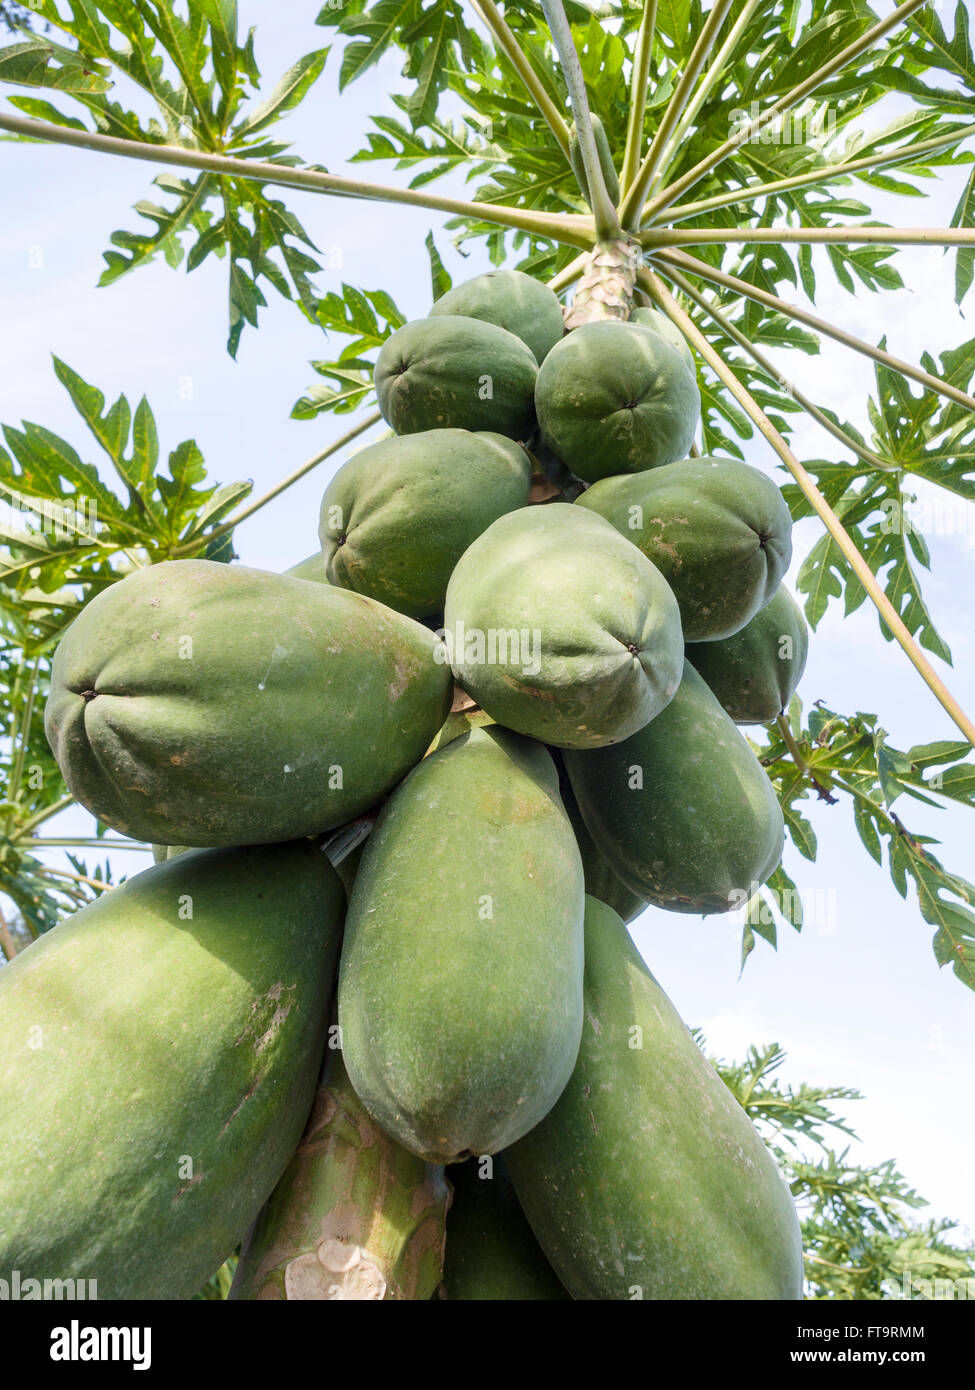 Looking up at Ripening Papayas. Large green papayas ripen as the leaves of its tree branch out like an umbrella in an orchard Stock Photo